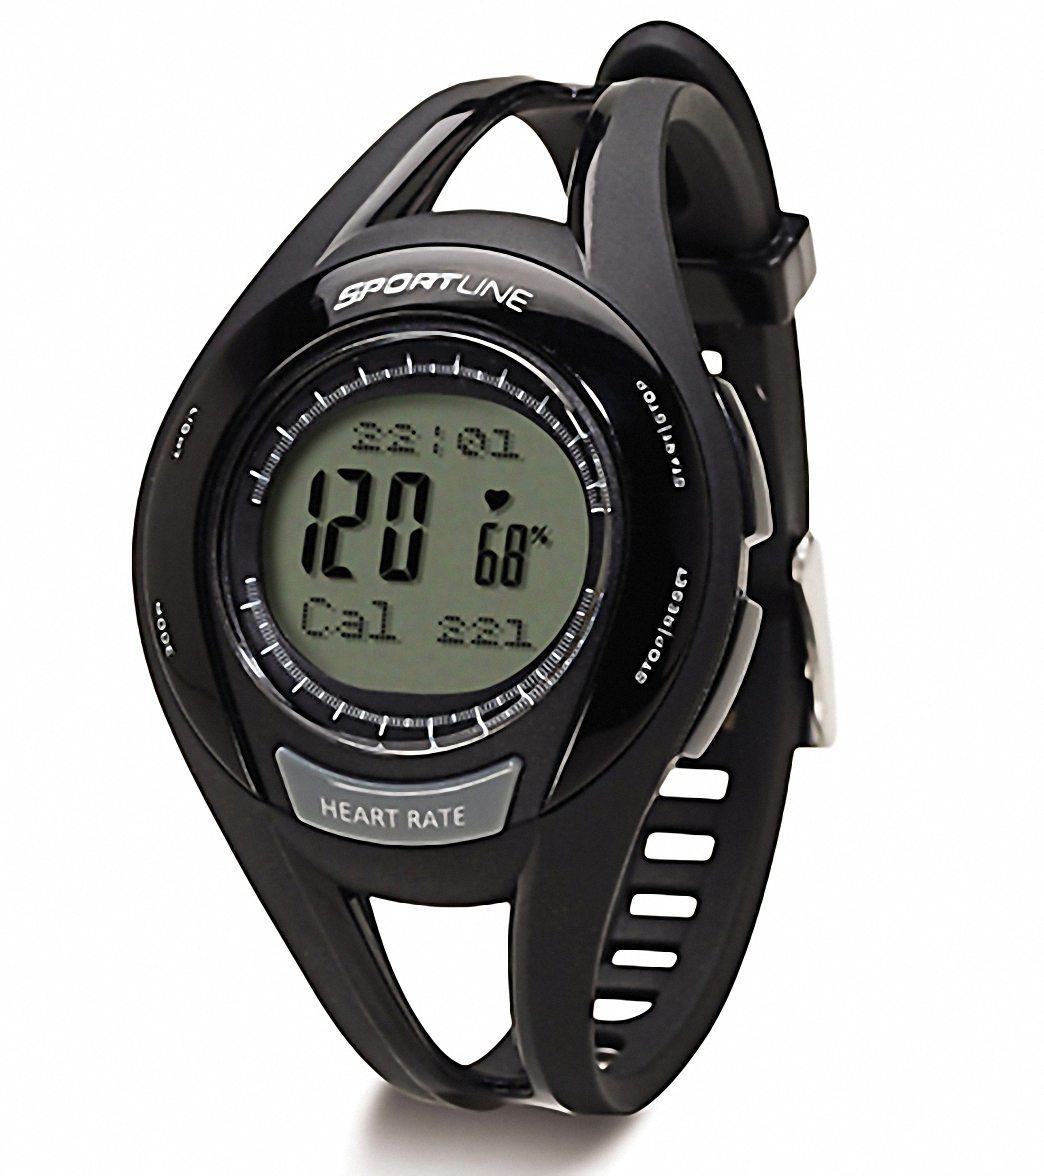 Sportline Men's Cardio (630) HRM Watch at SwimOutlet.com - Free Shipping